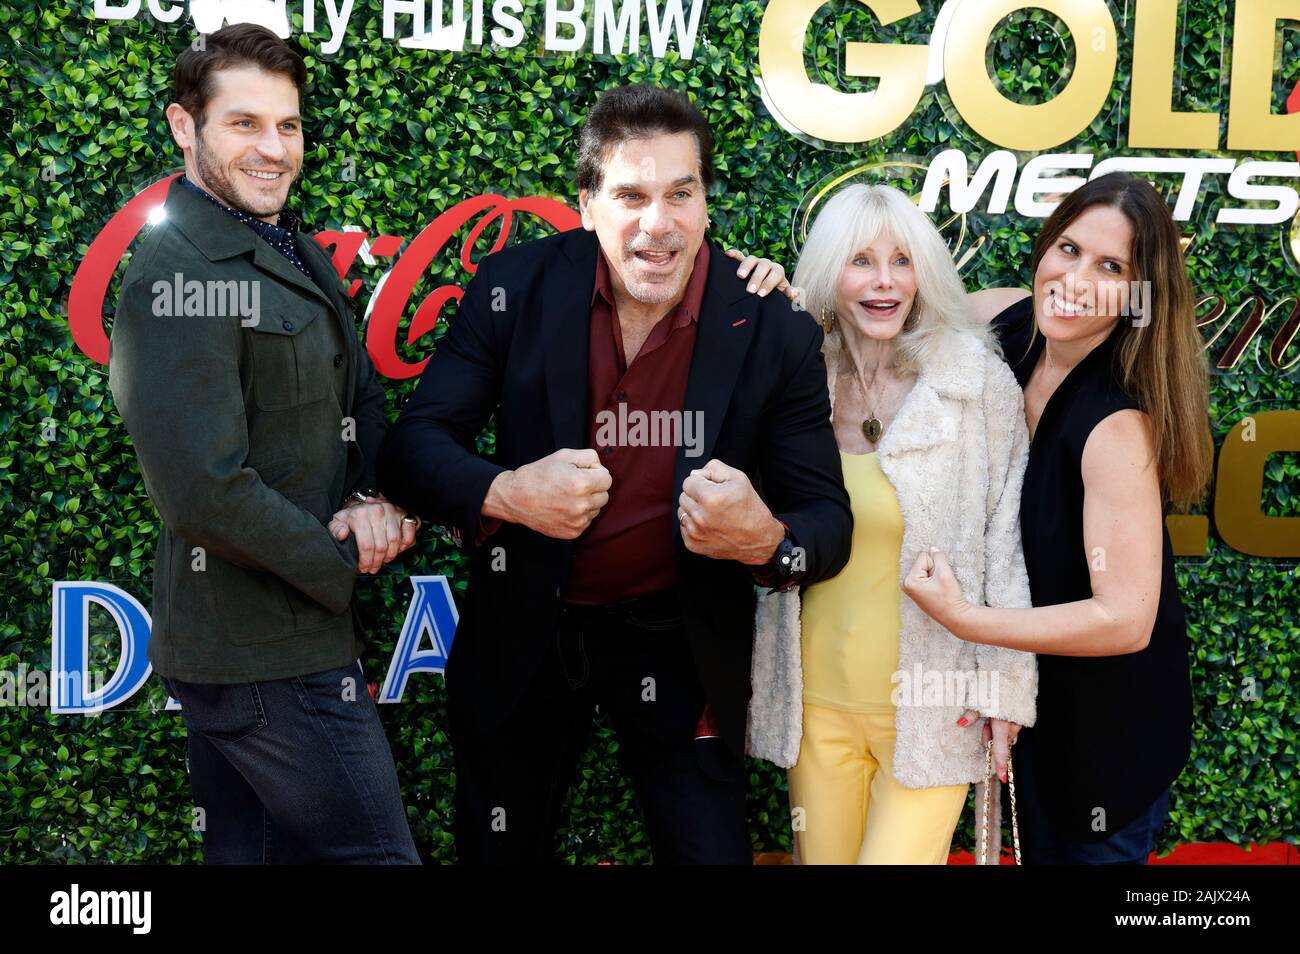 Los Angeles, USA. 04th Jan, 2020. Lou Ferrigno Jr., Lou Ferrigno, Carla Ferrigno and Shanna Ferrigno at the 7th Gold Meets Golden Event at the Virginia Robinson Gardens and Estate. Los Angeles, January 4, 2019 | usage worldwide Credit: dpa/Alamy Live News Stock Photo